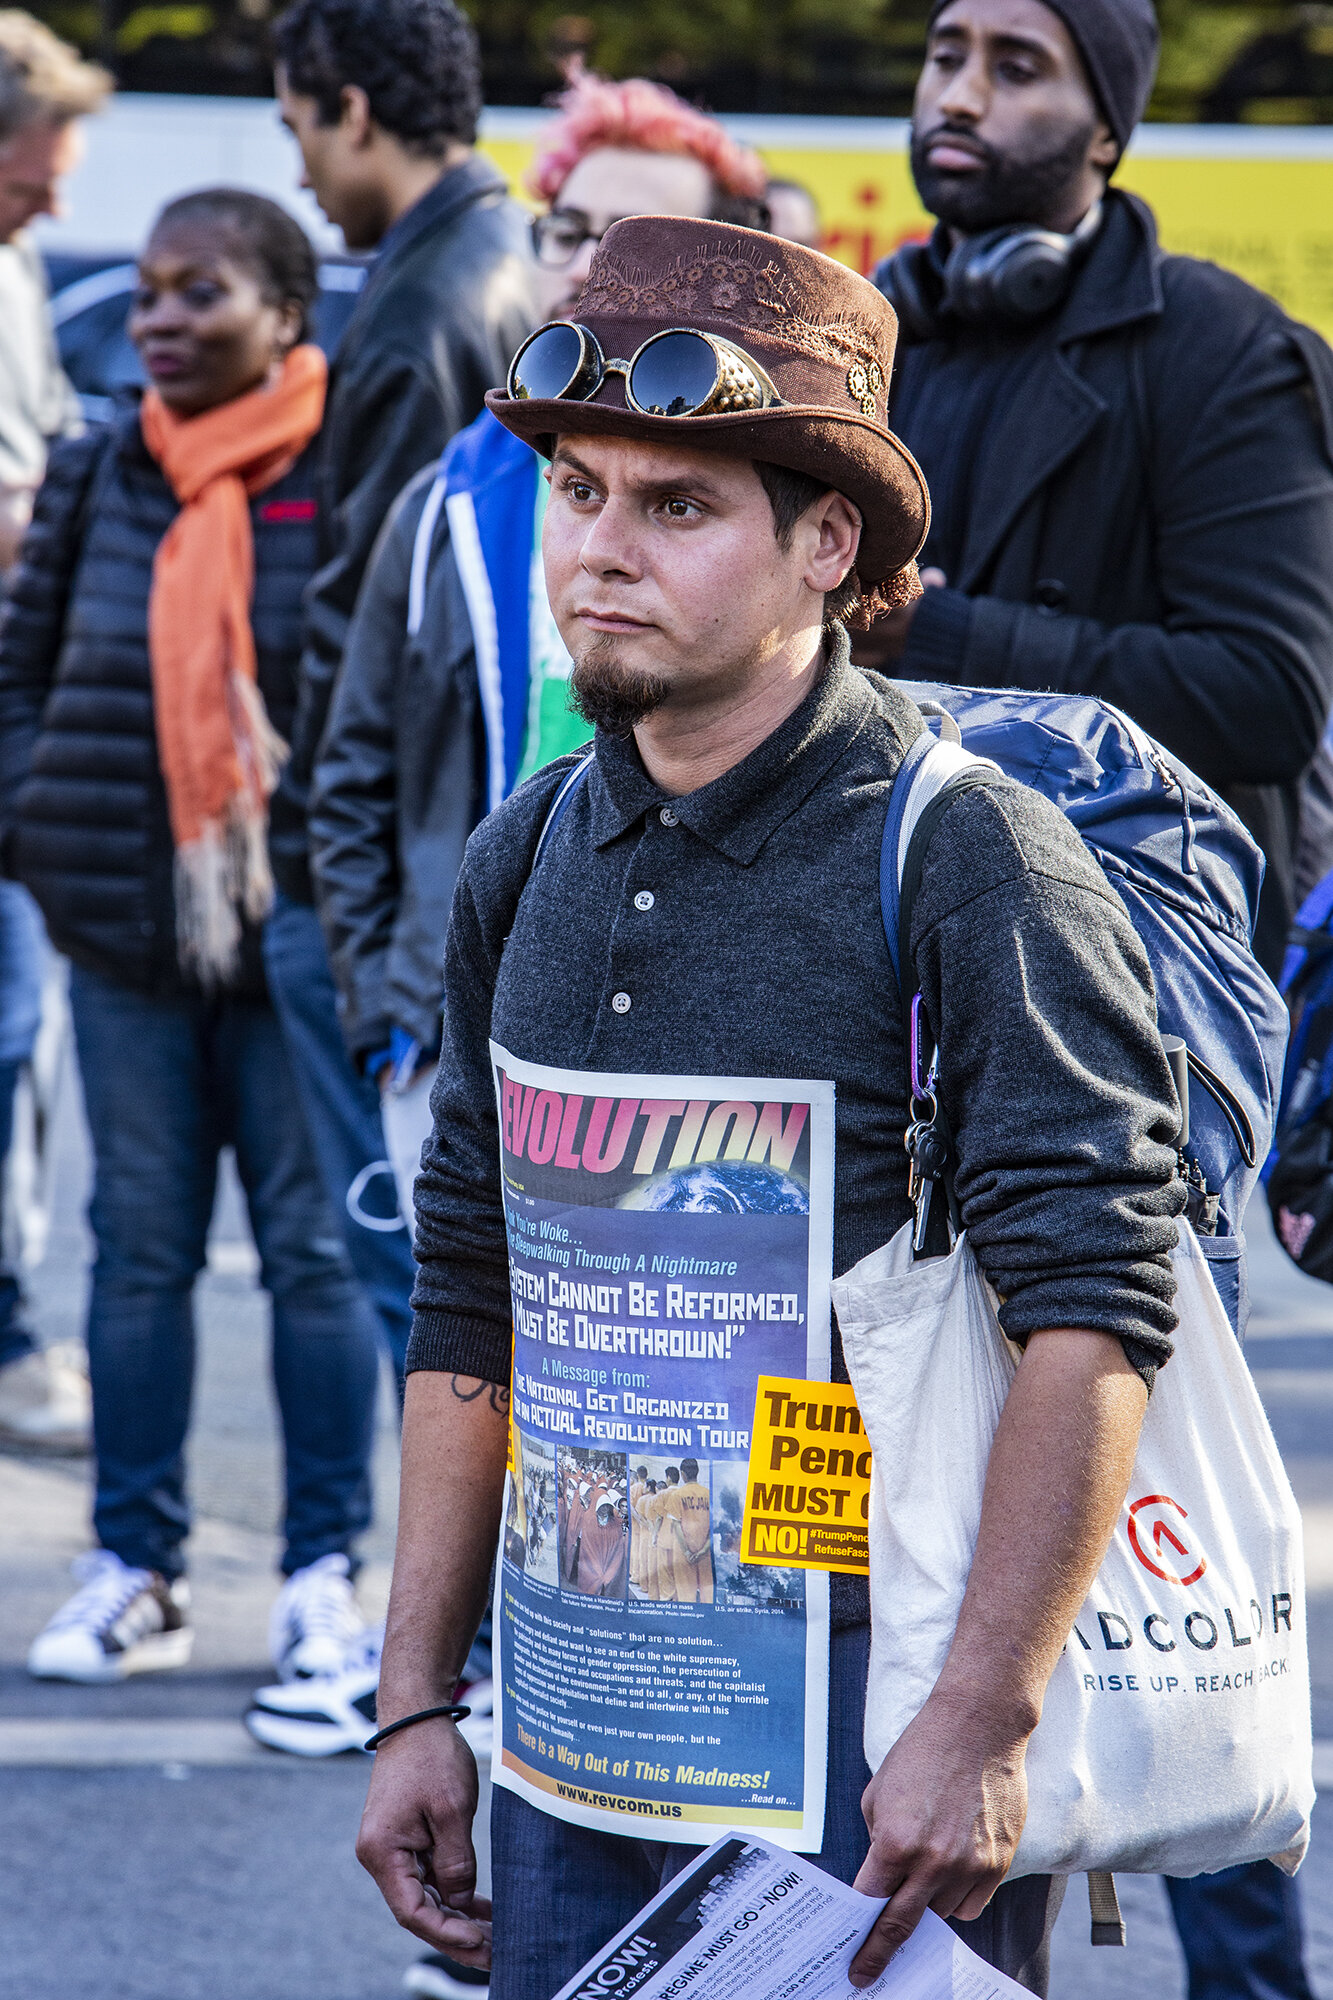 OUTNOW_Protest_2019_NYC-0562.jpg